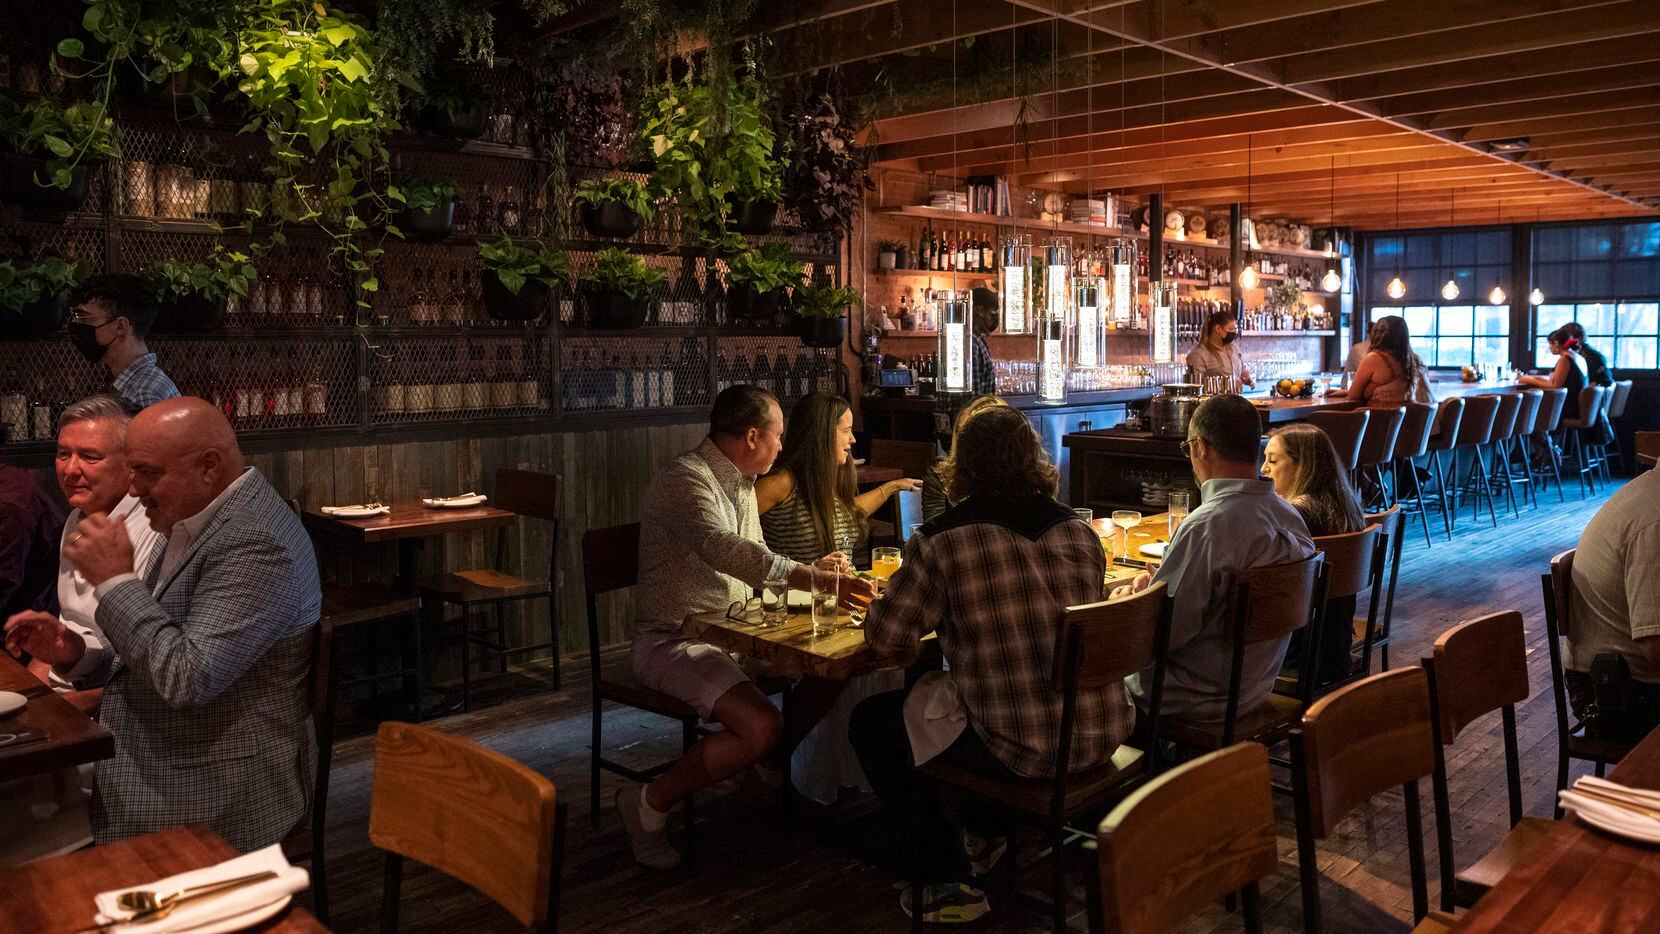 The dining area away from the bar inside Rye Restaurant on Greenville Avenue in Dallas, on...